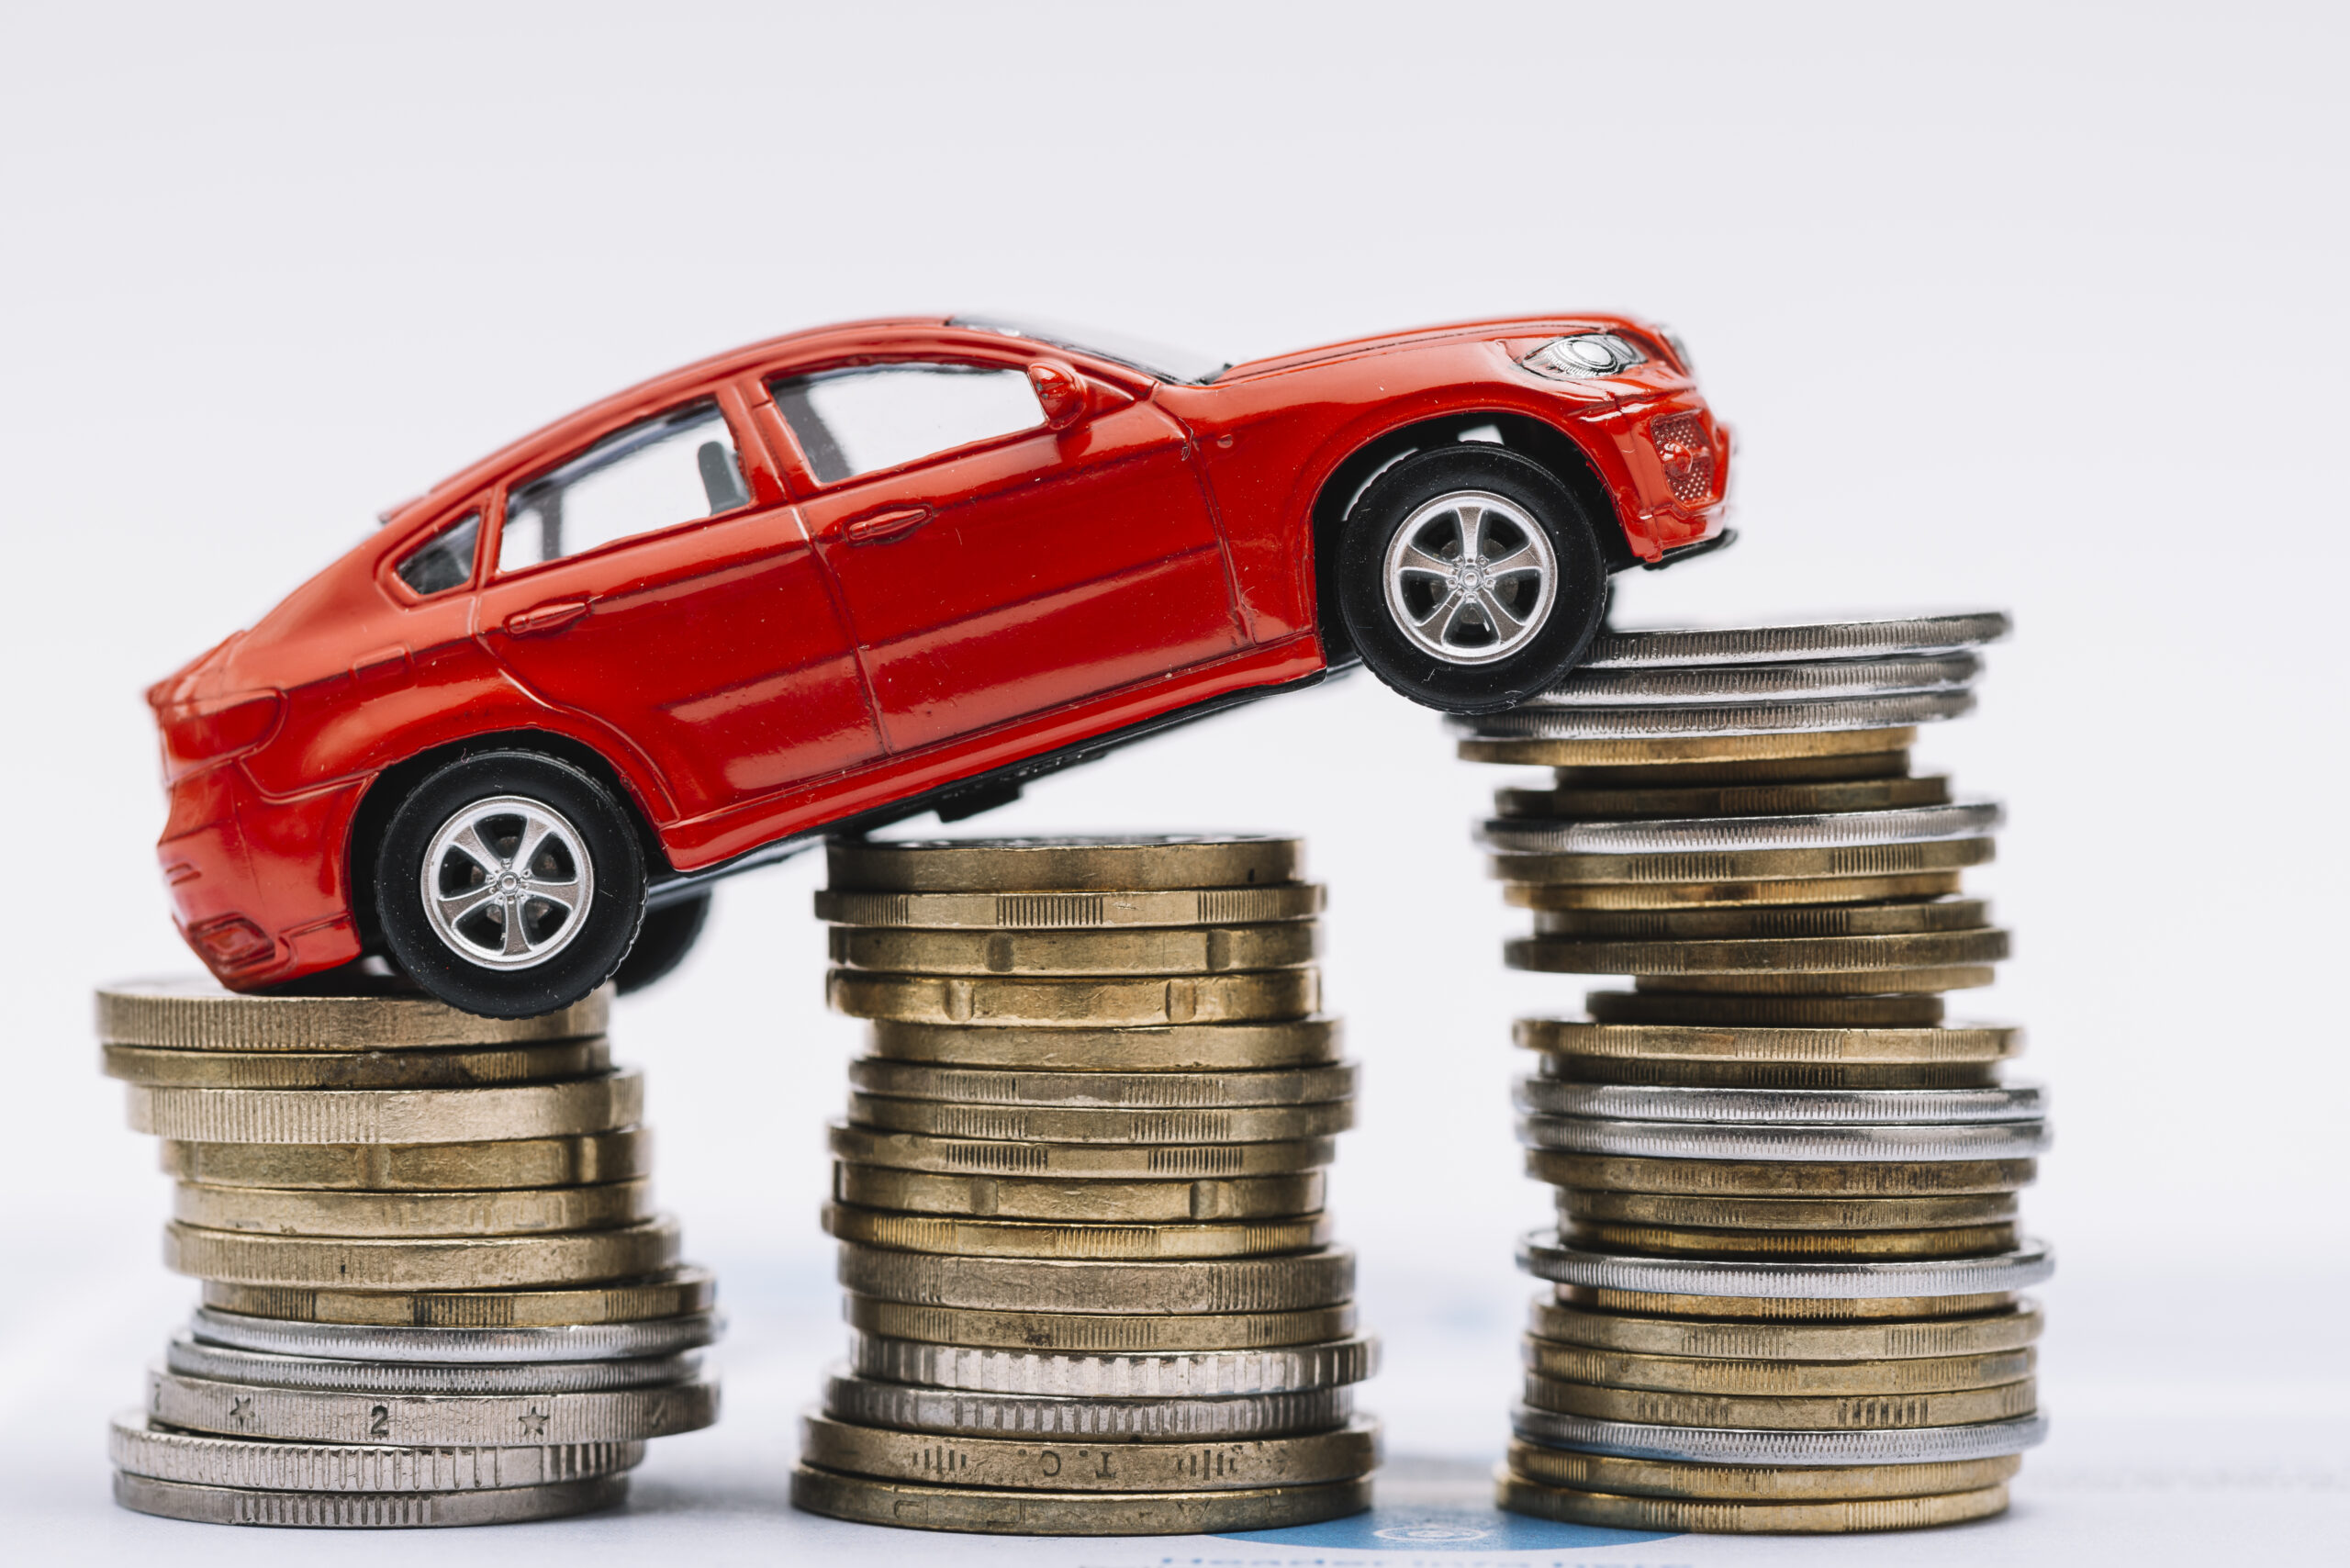 How does a car valuation website work?